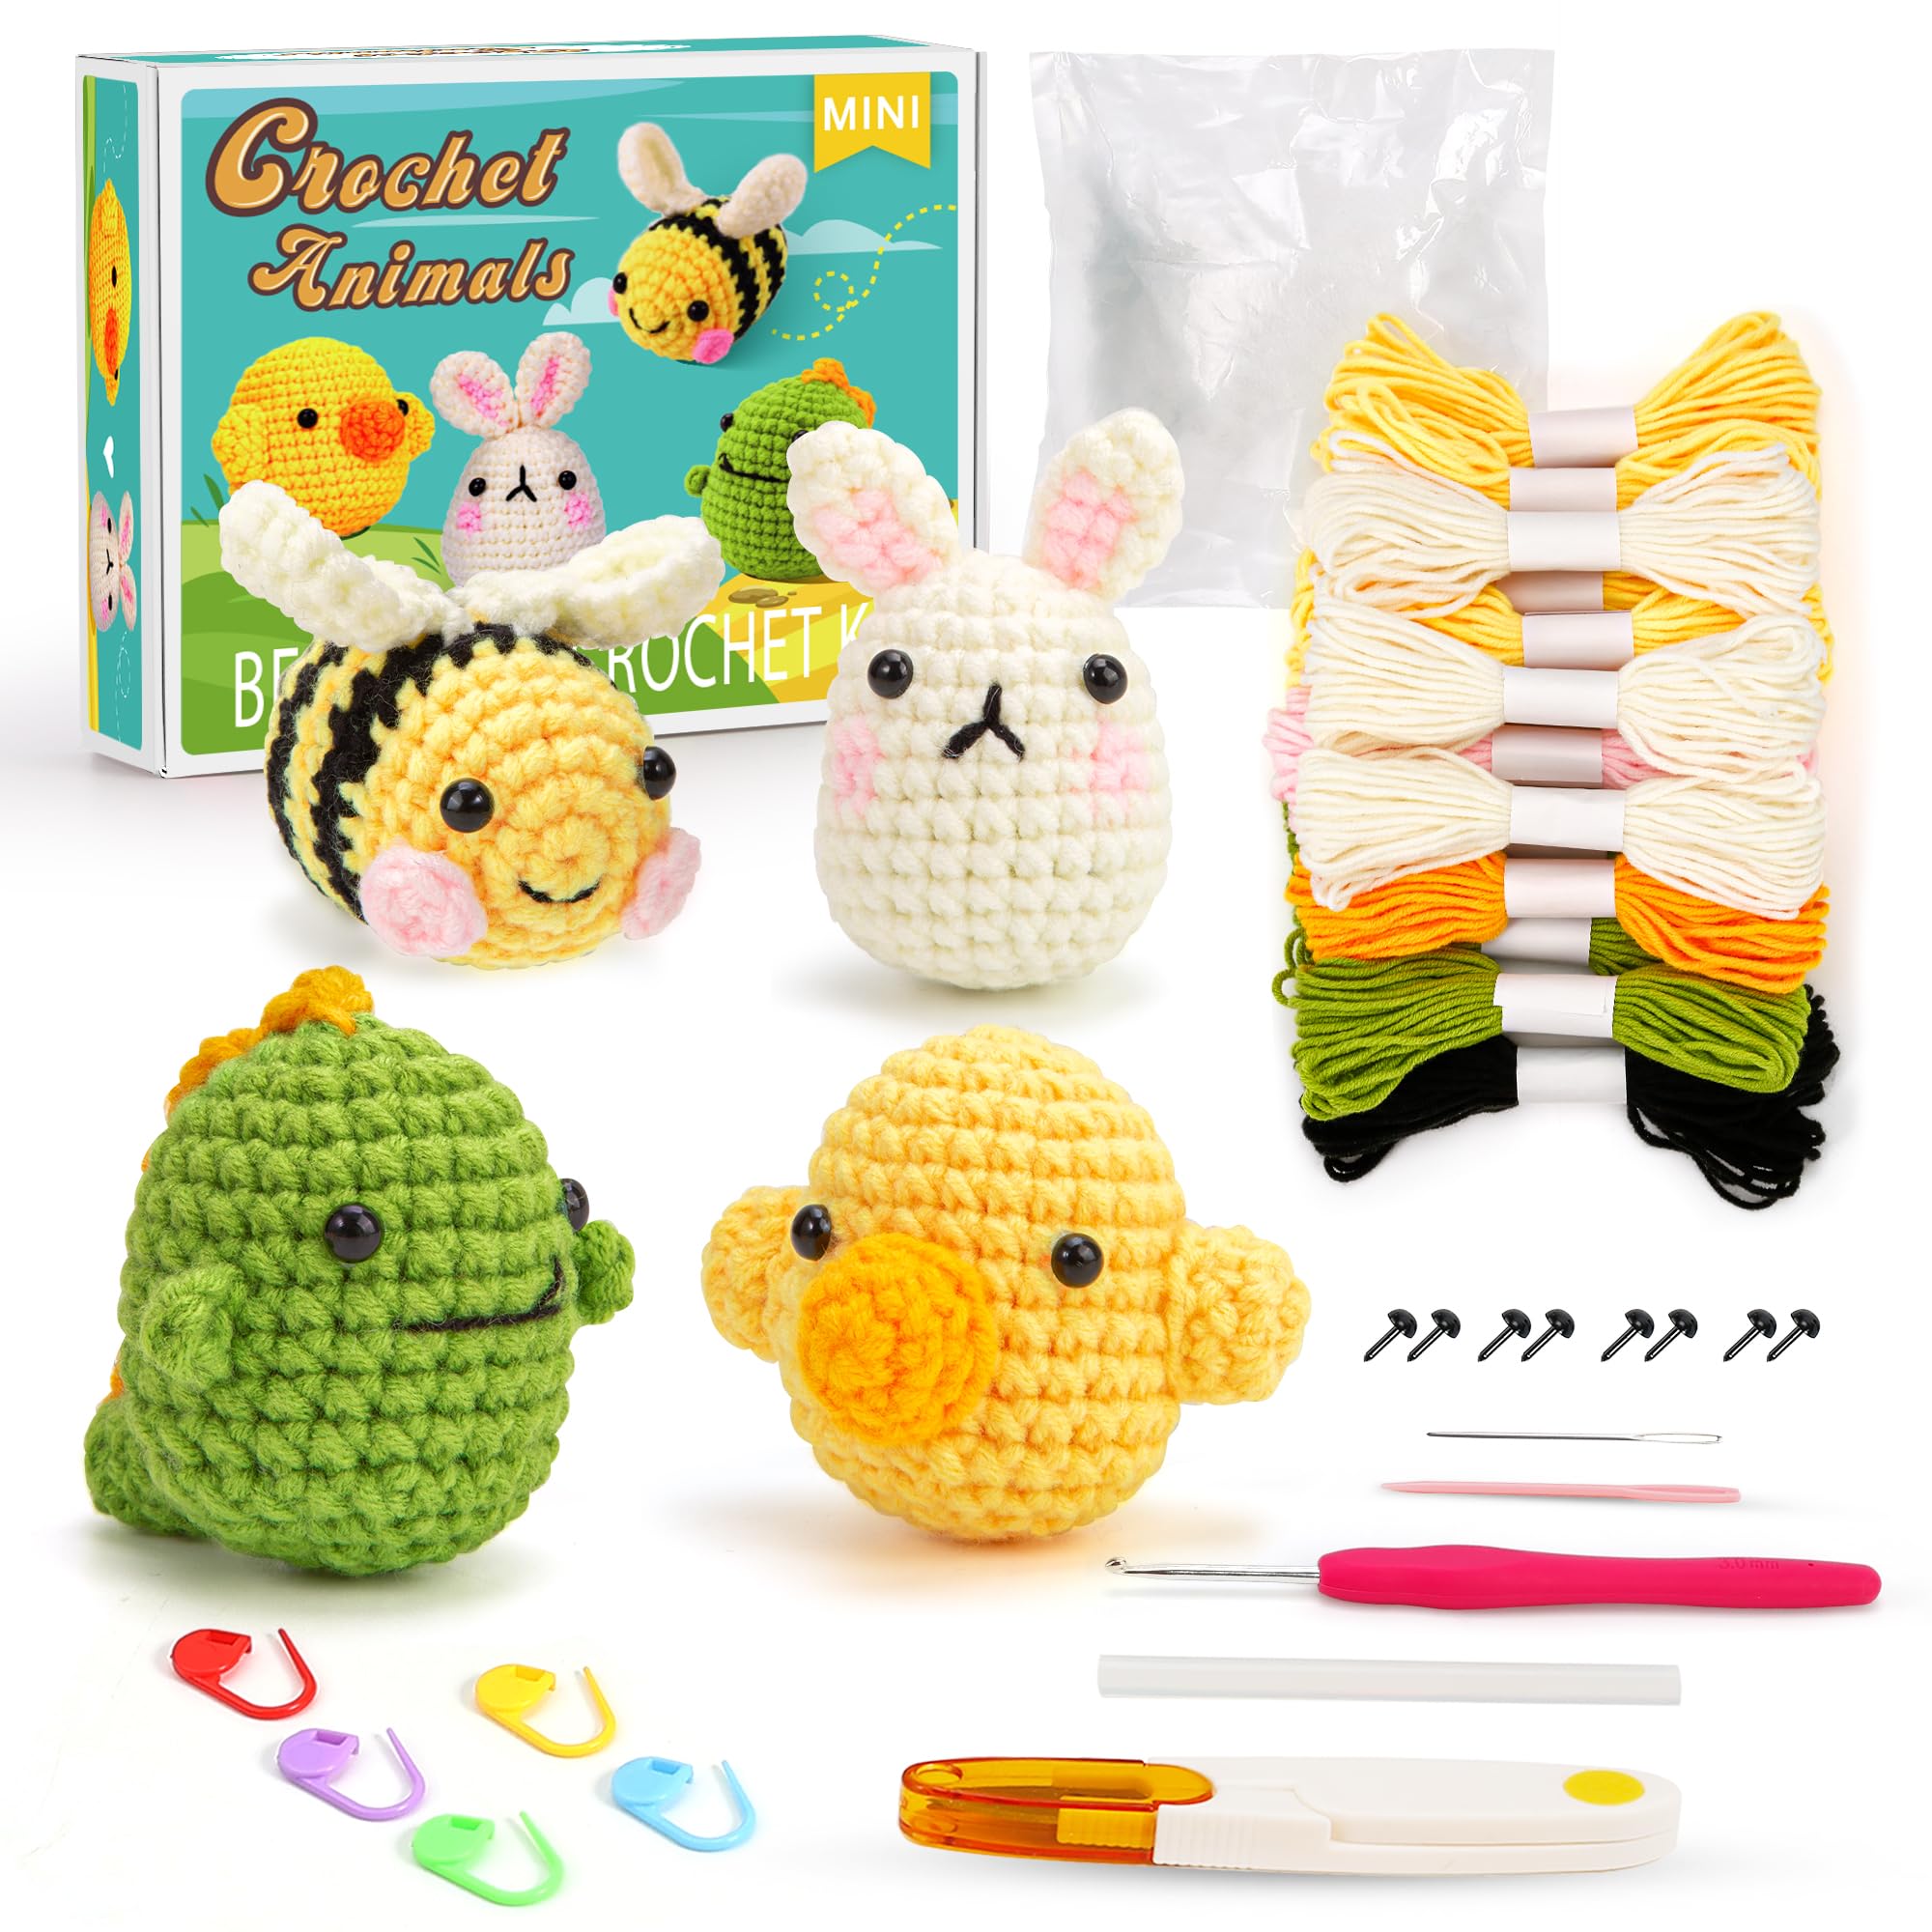  PP OPOUNT Crochet Kit for Beginners- 5 PCS Animal Crochet,  Beginner Crochet Kit for Adults Includes Step-by-Step Instructions and  Video Tutorials, Complete Crochet Set(Patent Product)